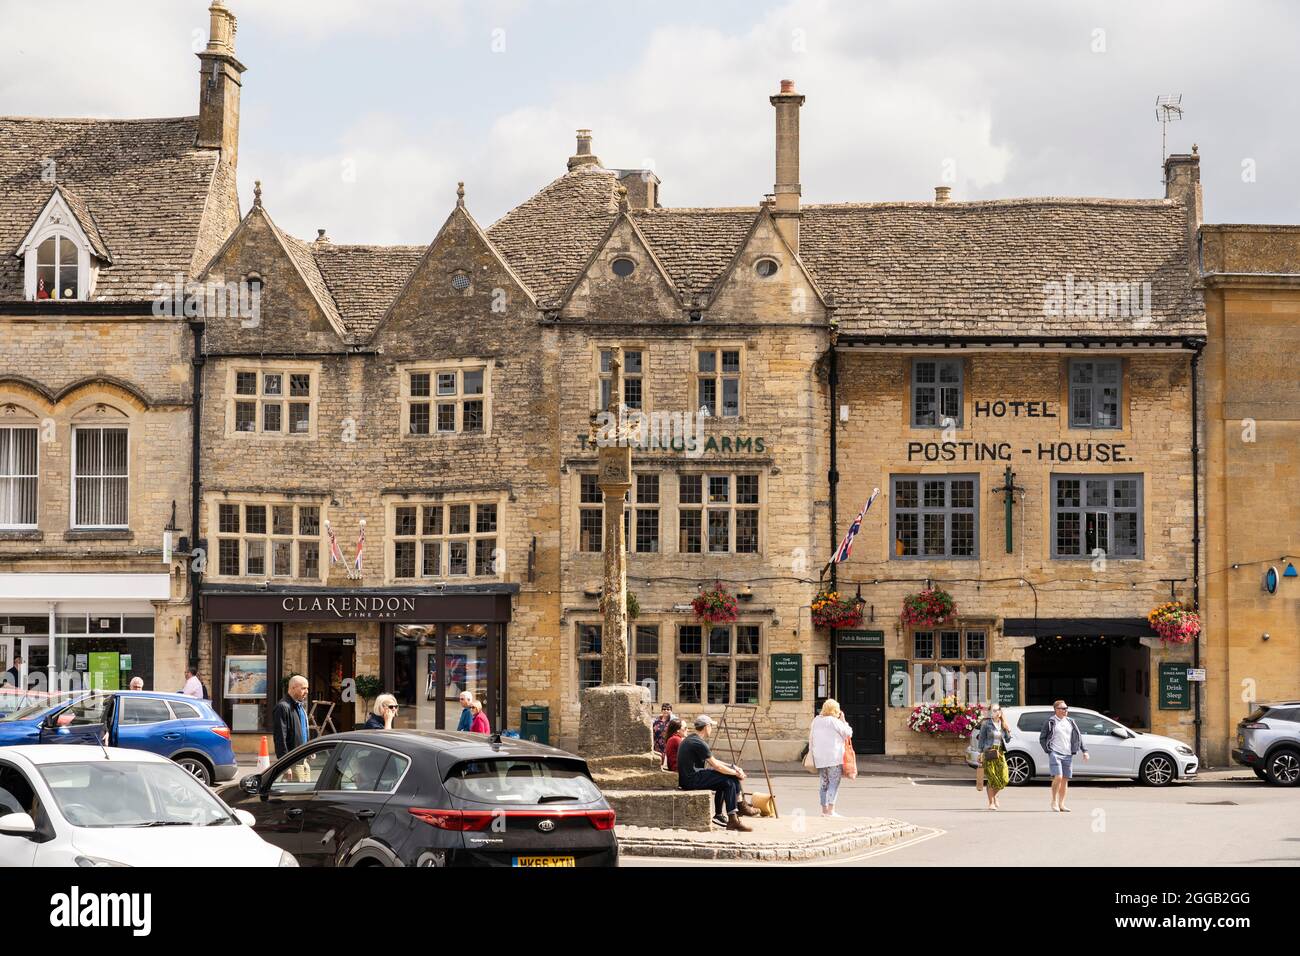 The Kings Arms Hotel and Posting House and the medieval Market Cross monument in the Cotswold market town of Stow on the Wold, Gloucestershire, UK Stock Photo